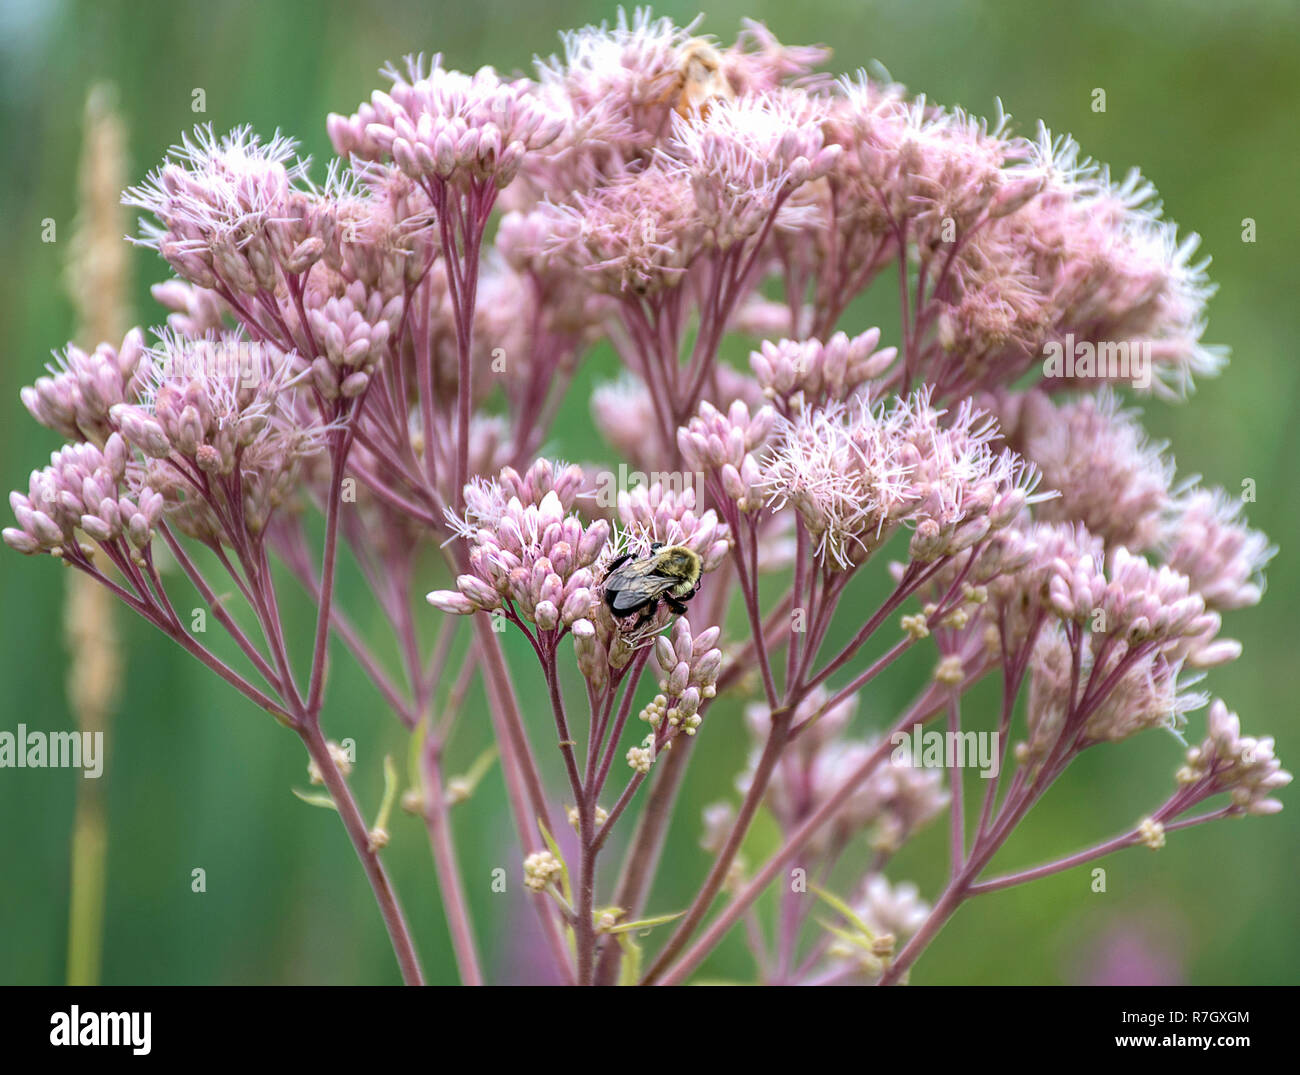 close up of bumble bee on pink flowering milkweed plant Stock Photo